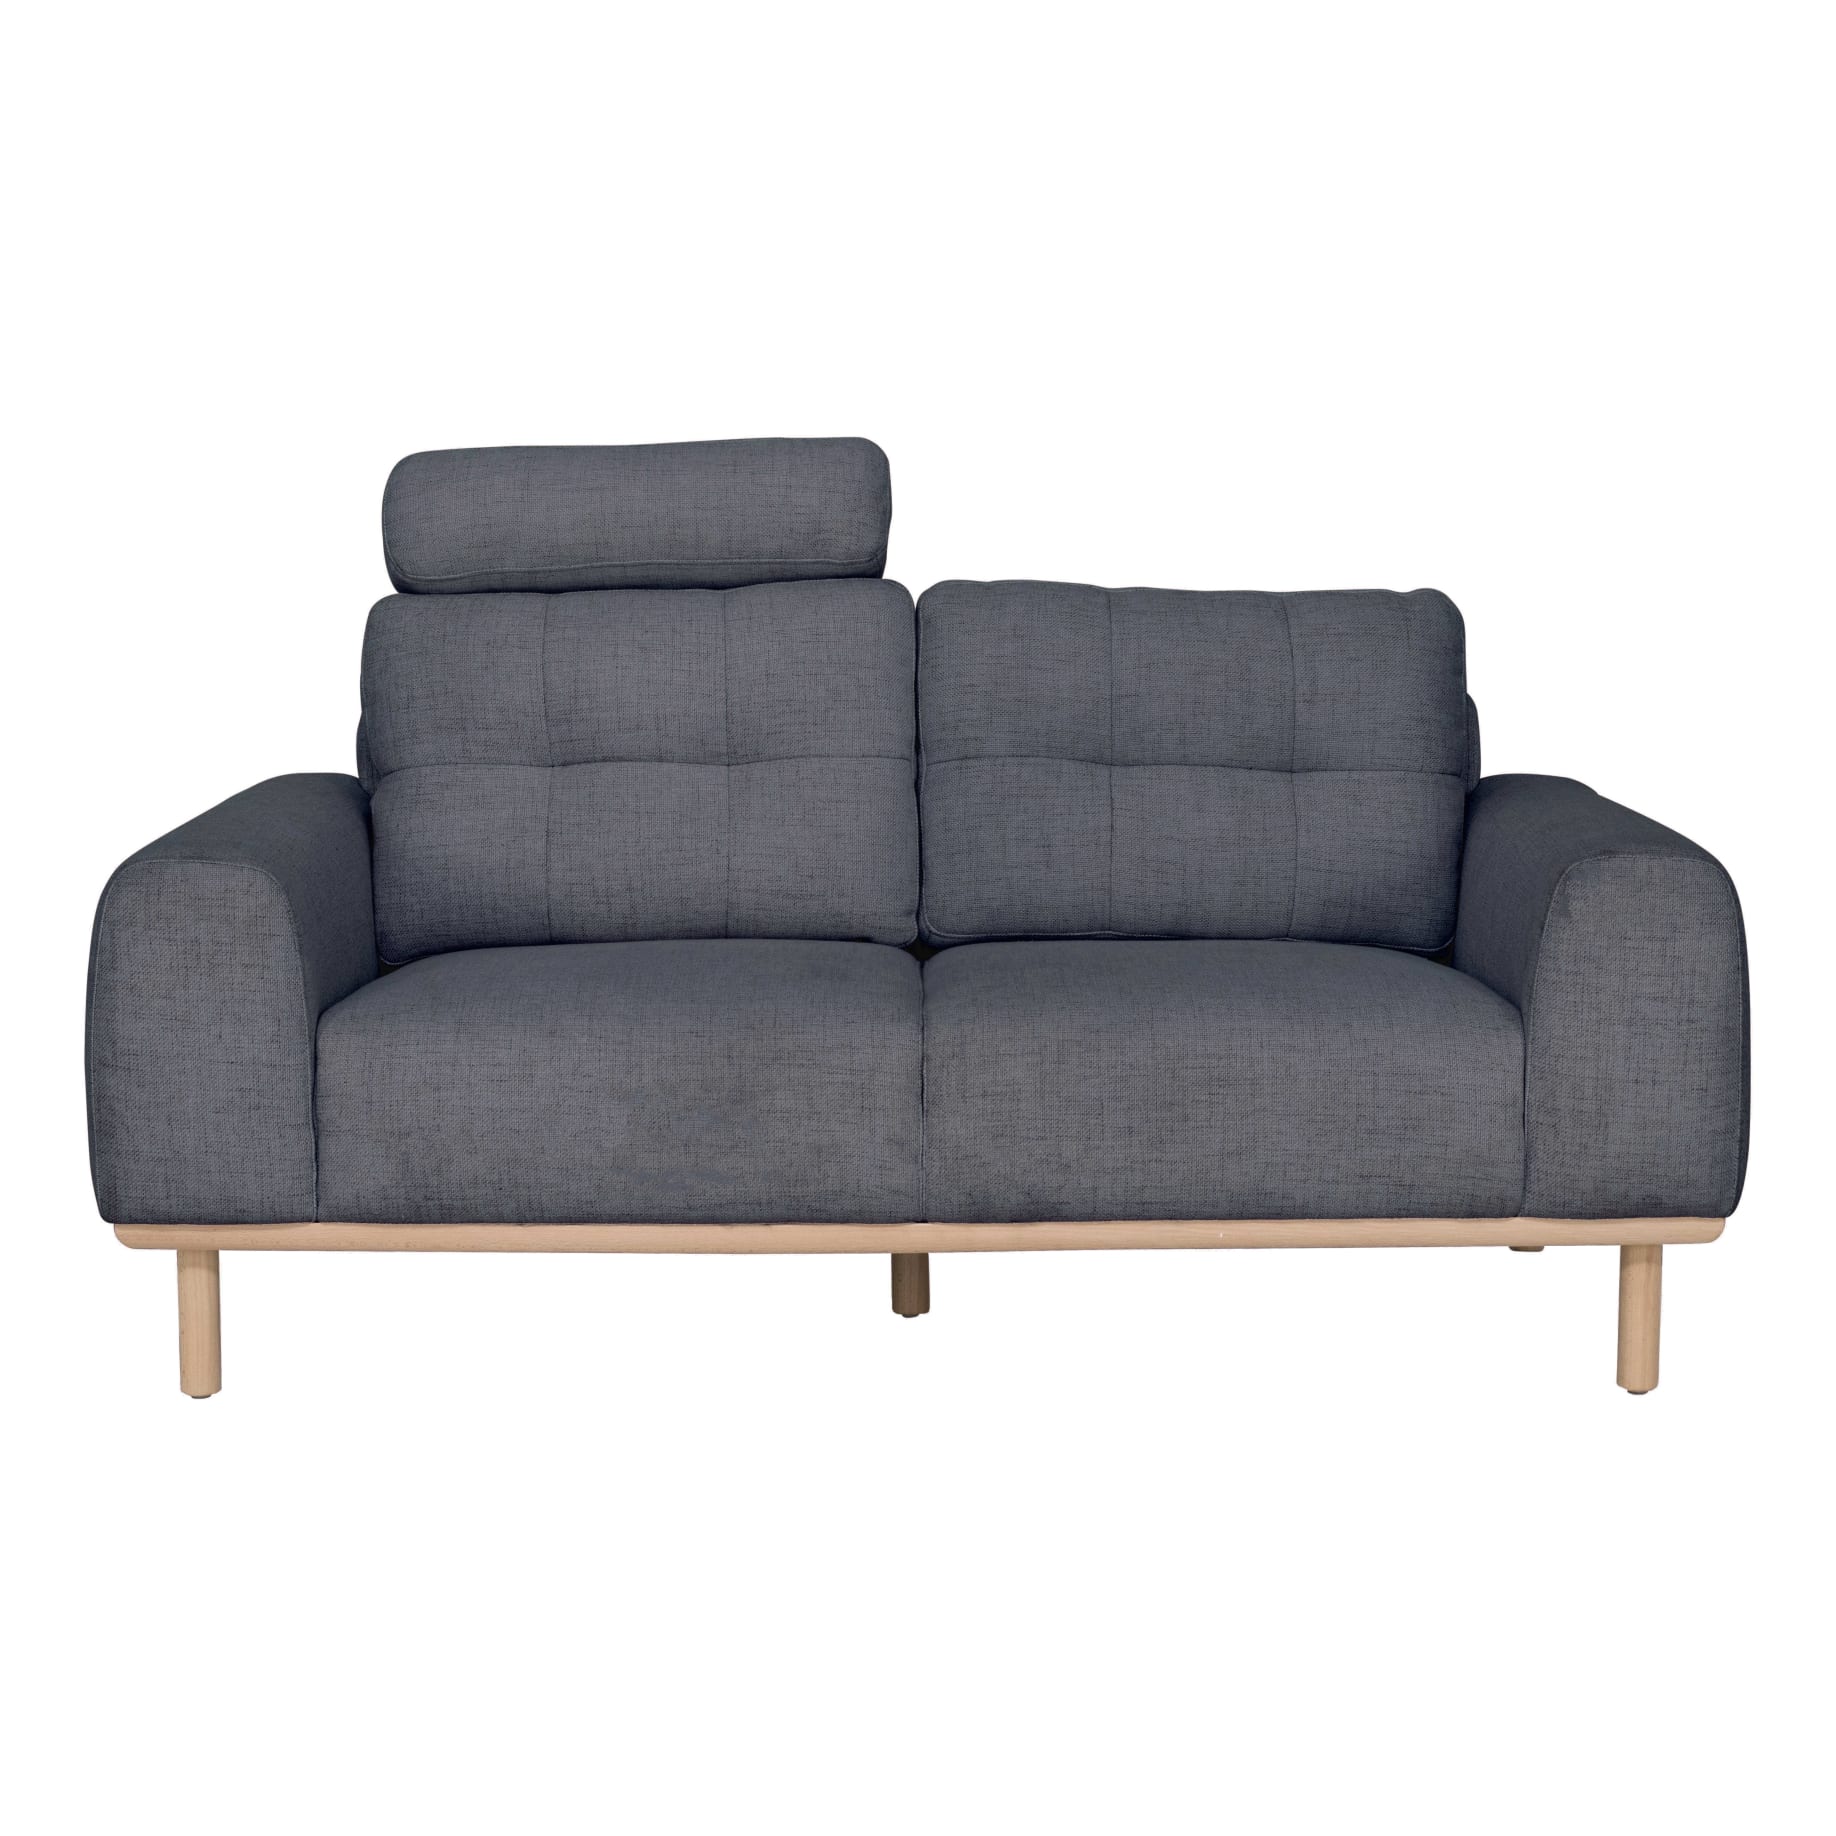 Stratton 2.5 Seater Sofa in Cloud Storm